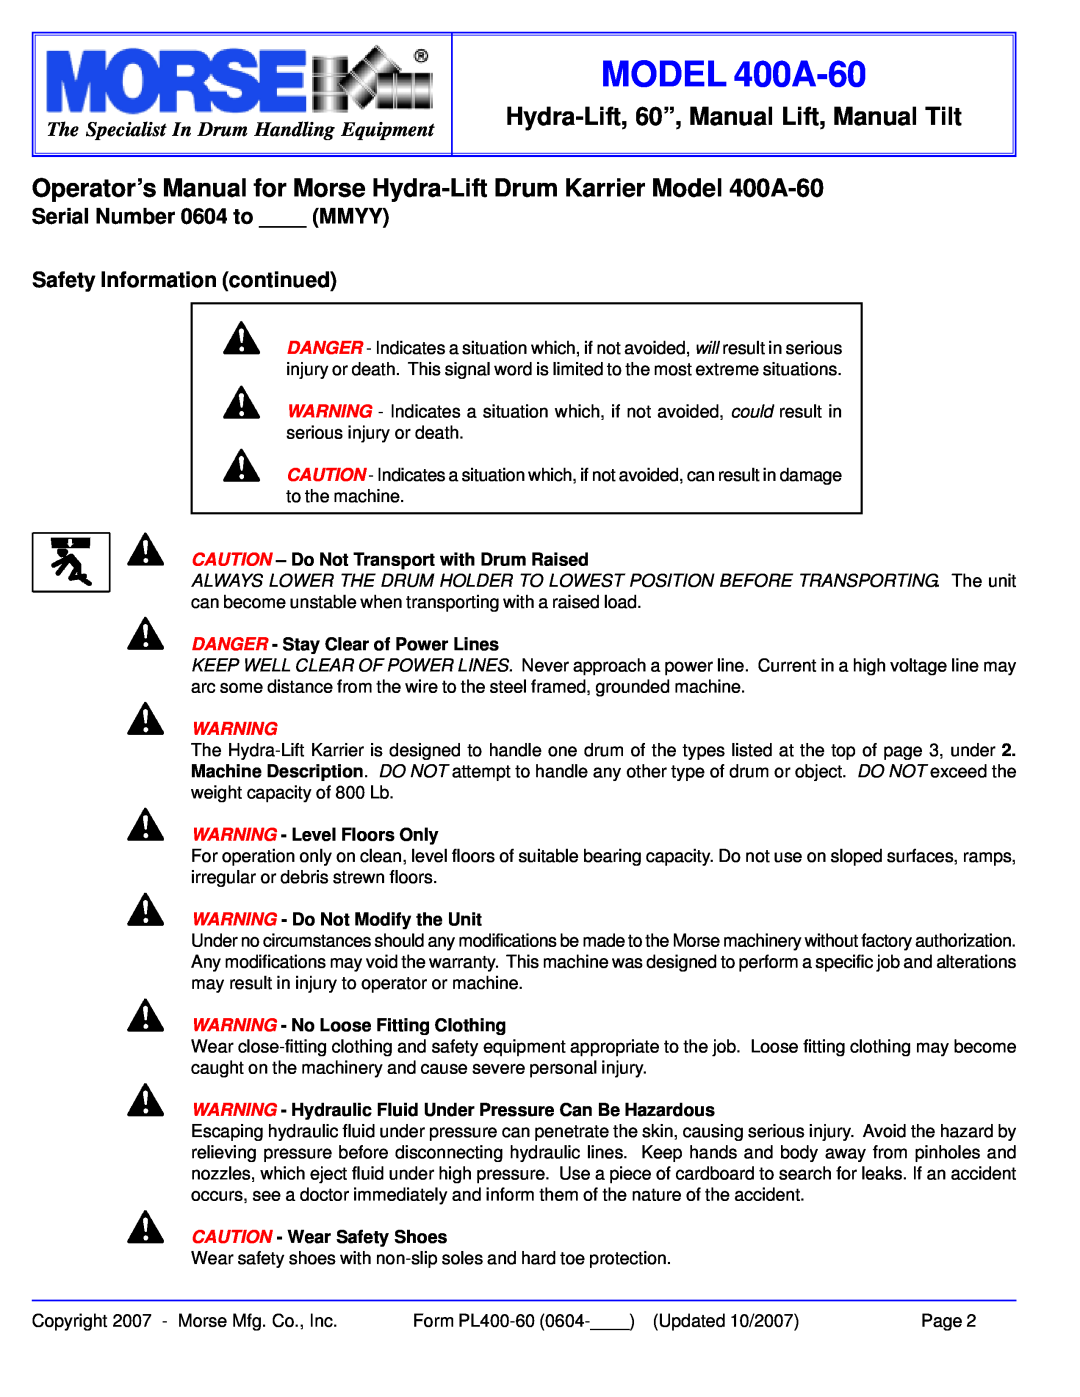 HydroSurge Operator’s Manual for Morse Hydra-Lift Drum Karrier Model 400A-60, DANGER - Stay Clear of Power Lines 